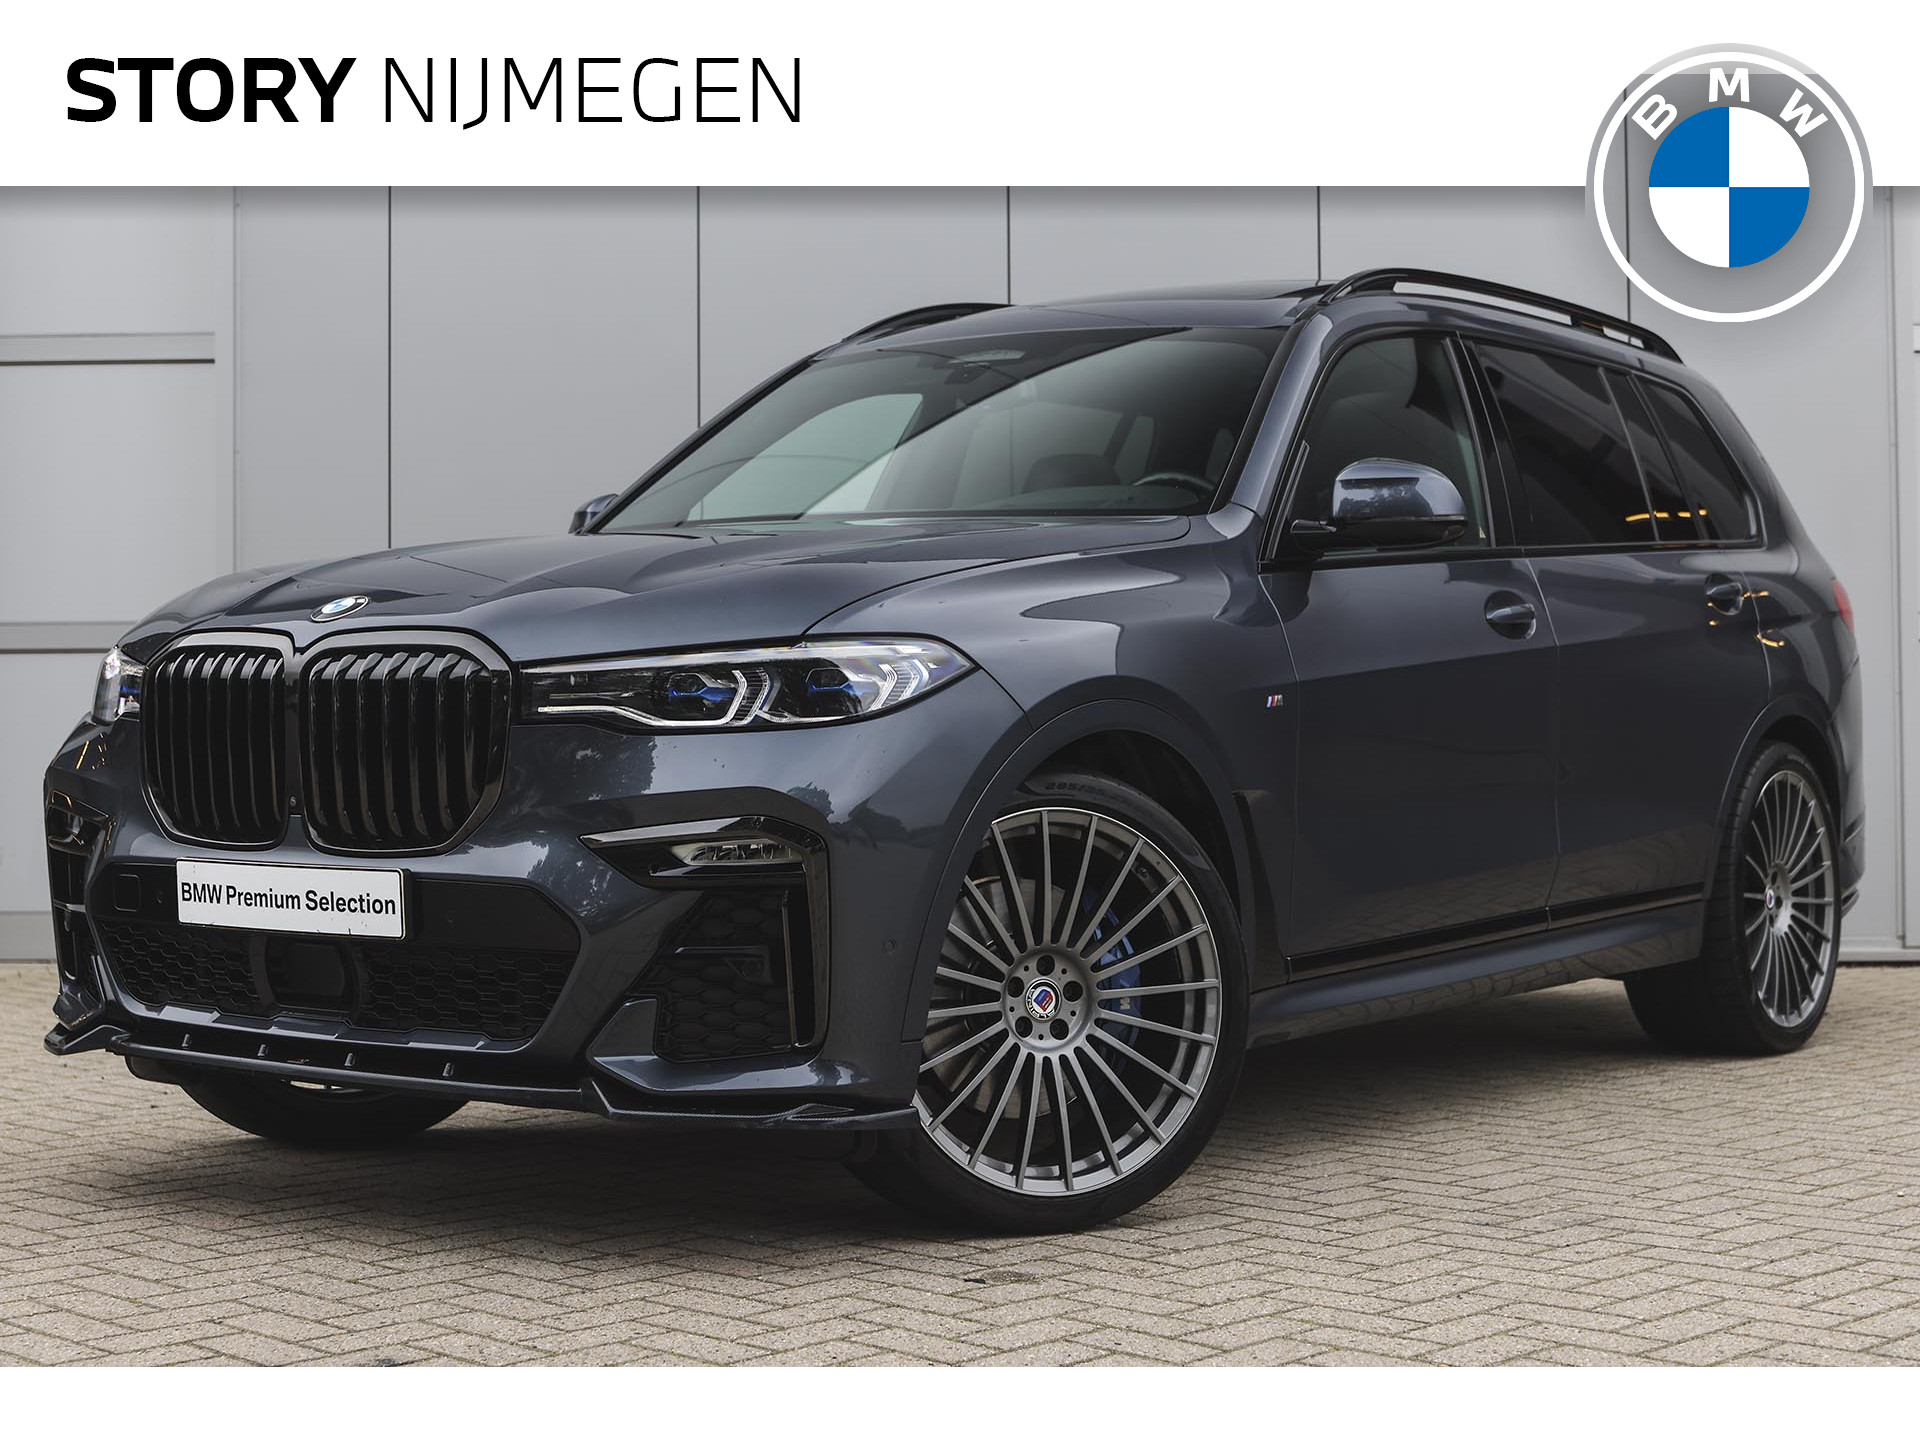 BMW X7 M50i High Executive Automaat / Active Steering / Stoelventilatie / Laserlight / Soft Close / Head-Up / Gesture Control / Parking Assistant Plus / Alpina wielen 23 inch